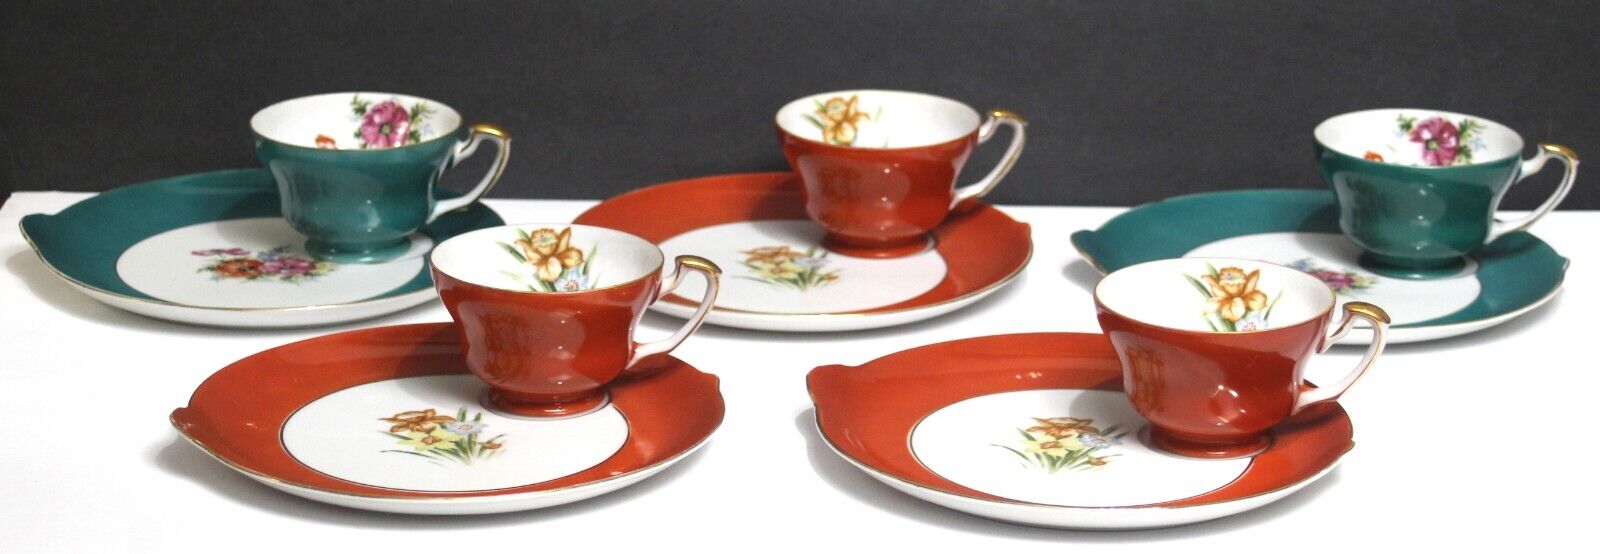 VTG Teacup and Saucer Snack Plate Hand Painted Occupied Japan Set of 5 UCAGCO